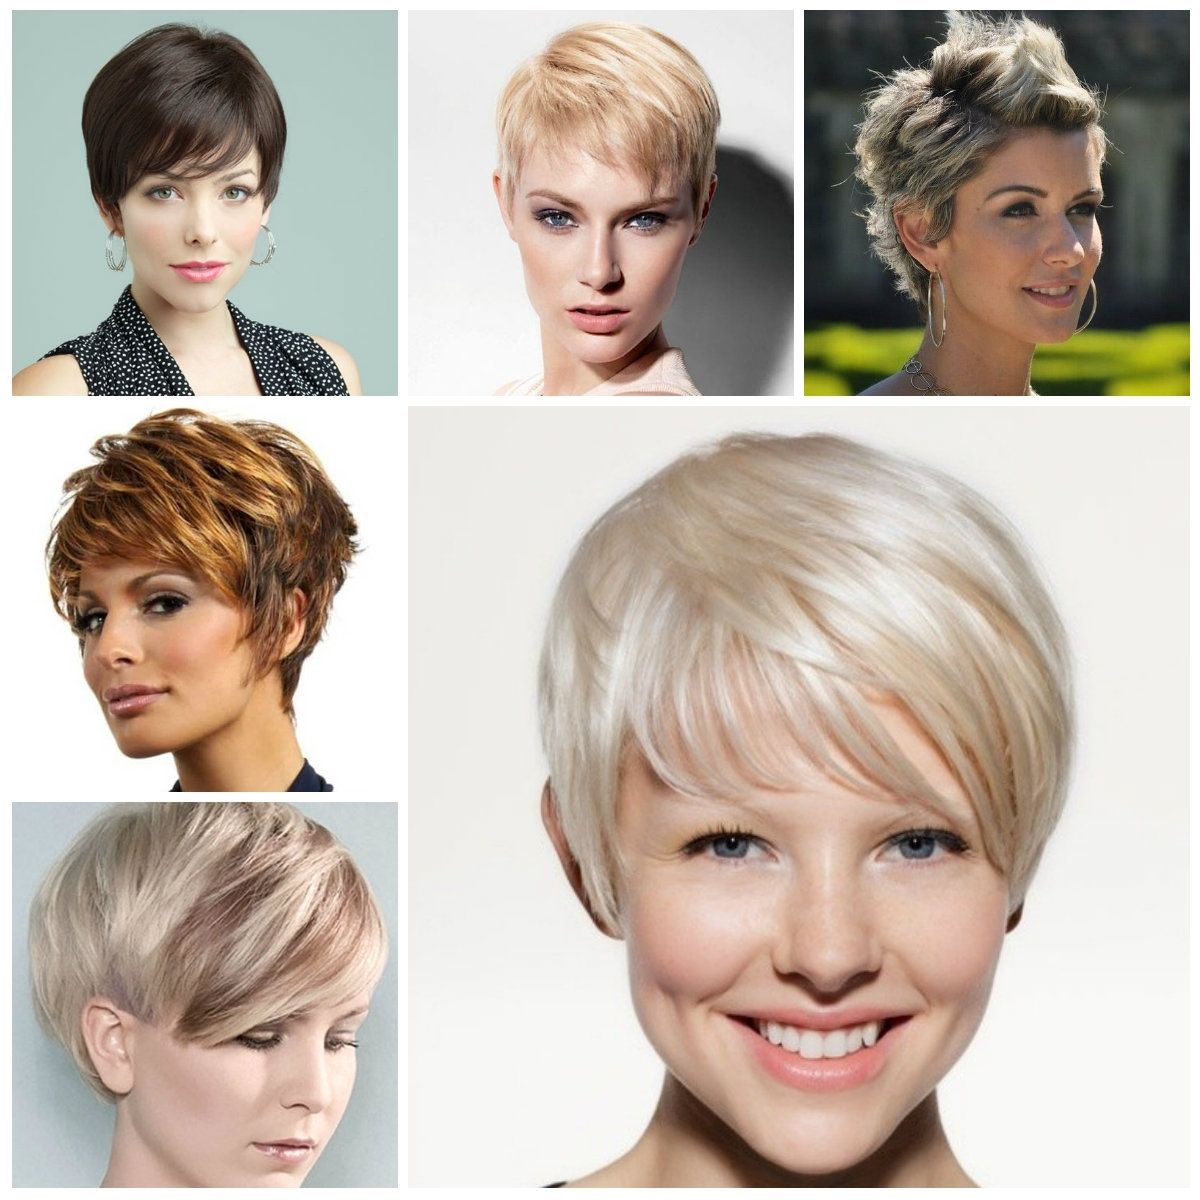 Pixie Haircut Trends For 2016 | 2017 Haircuts, Hairstyles And Hair Inside Best And Newest New Pixie Hairstyles (View 12 of 15)